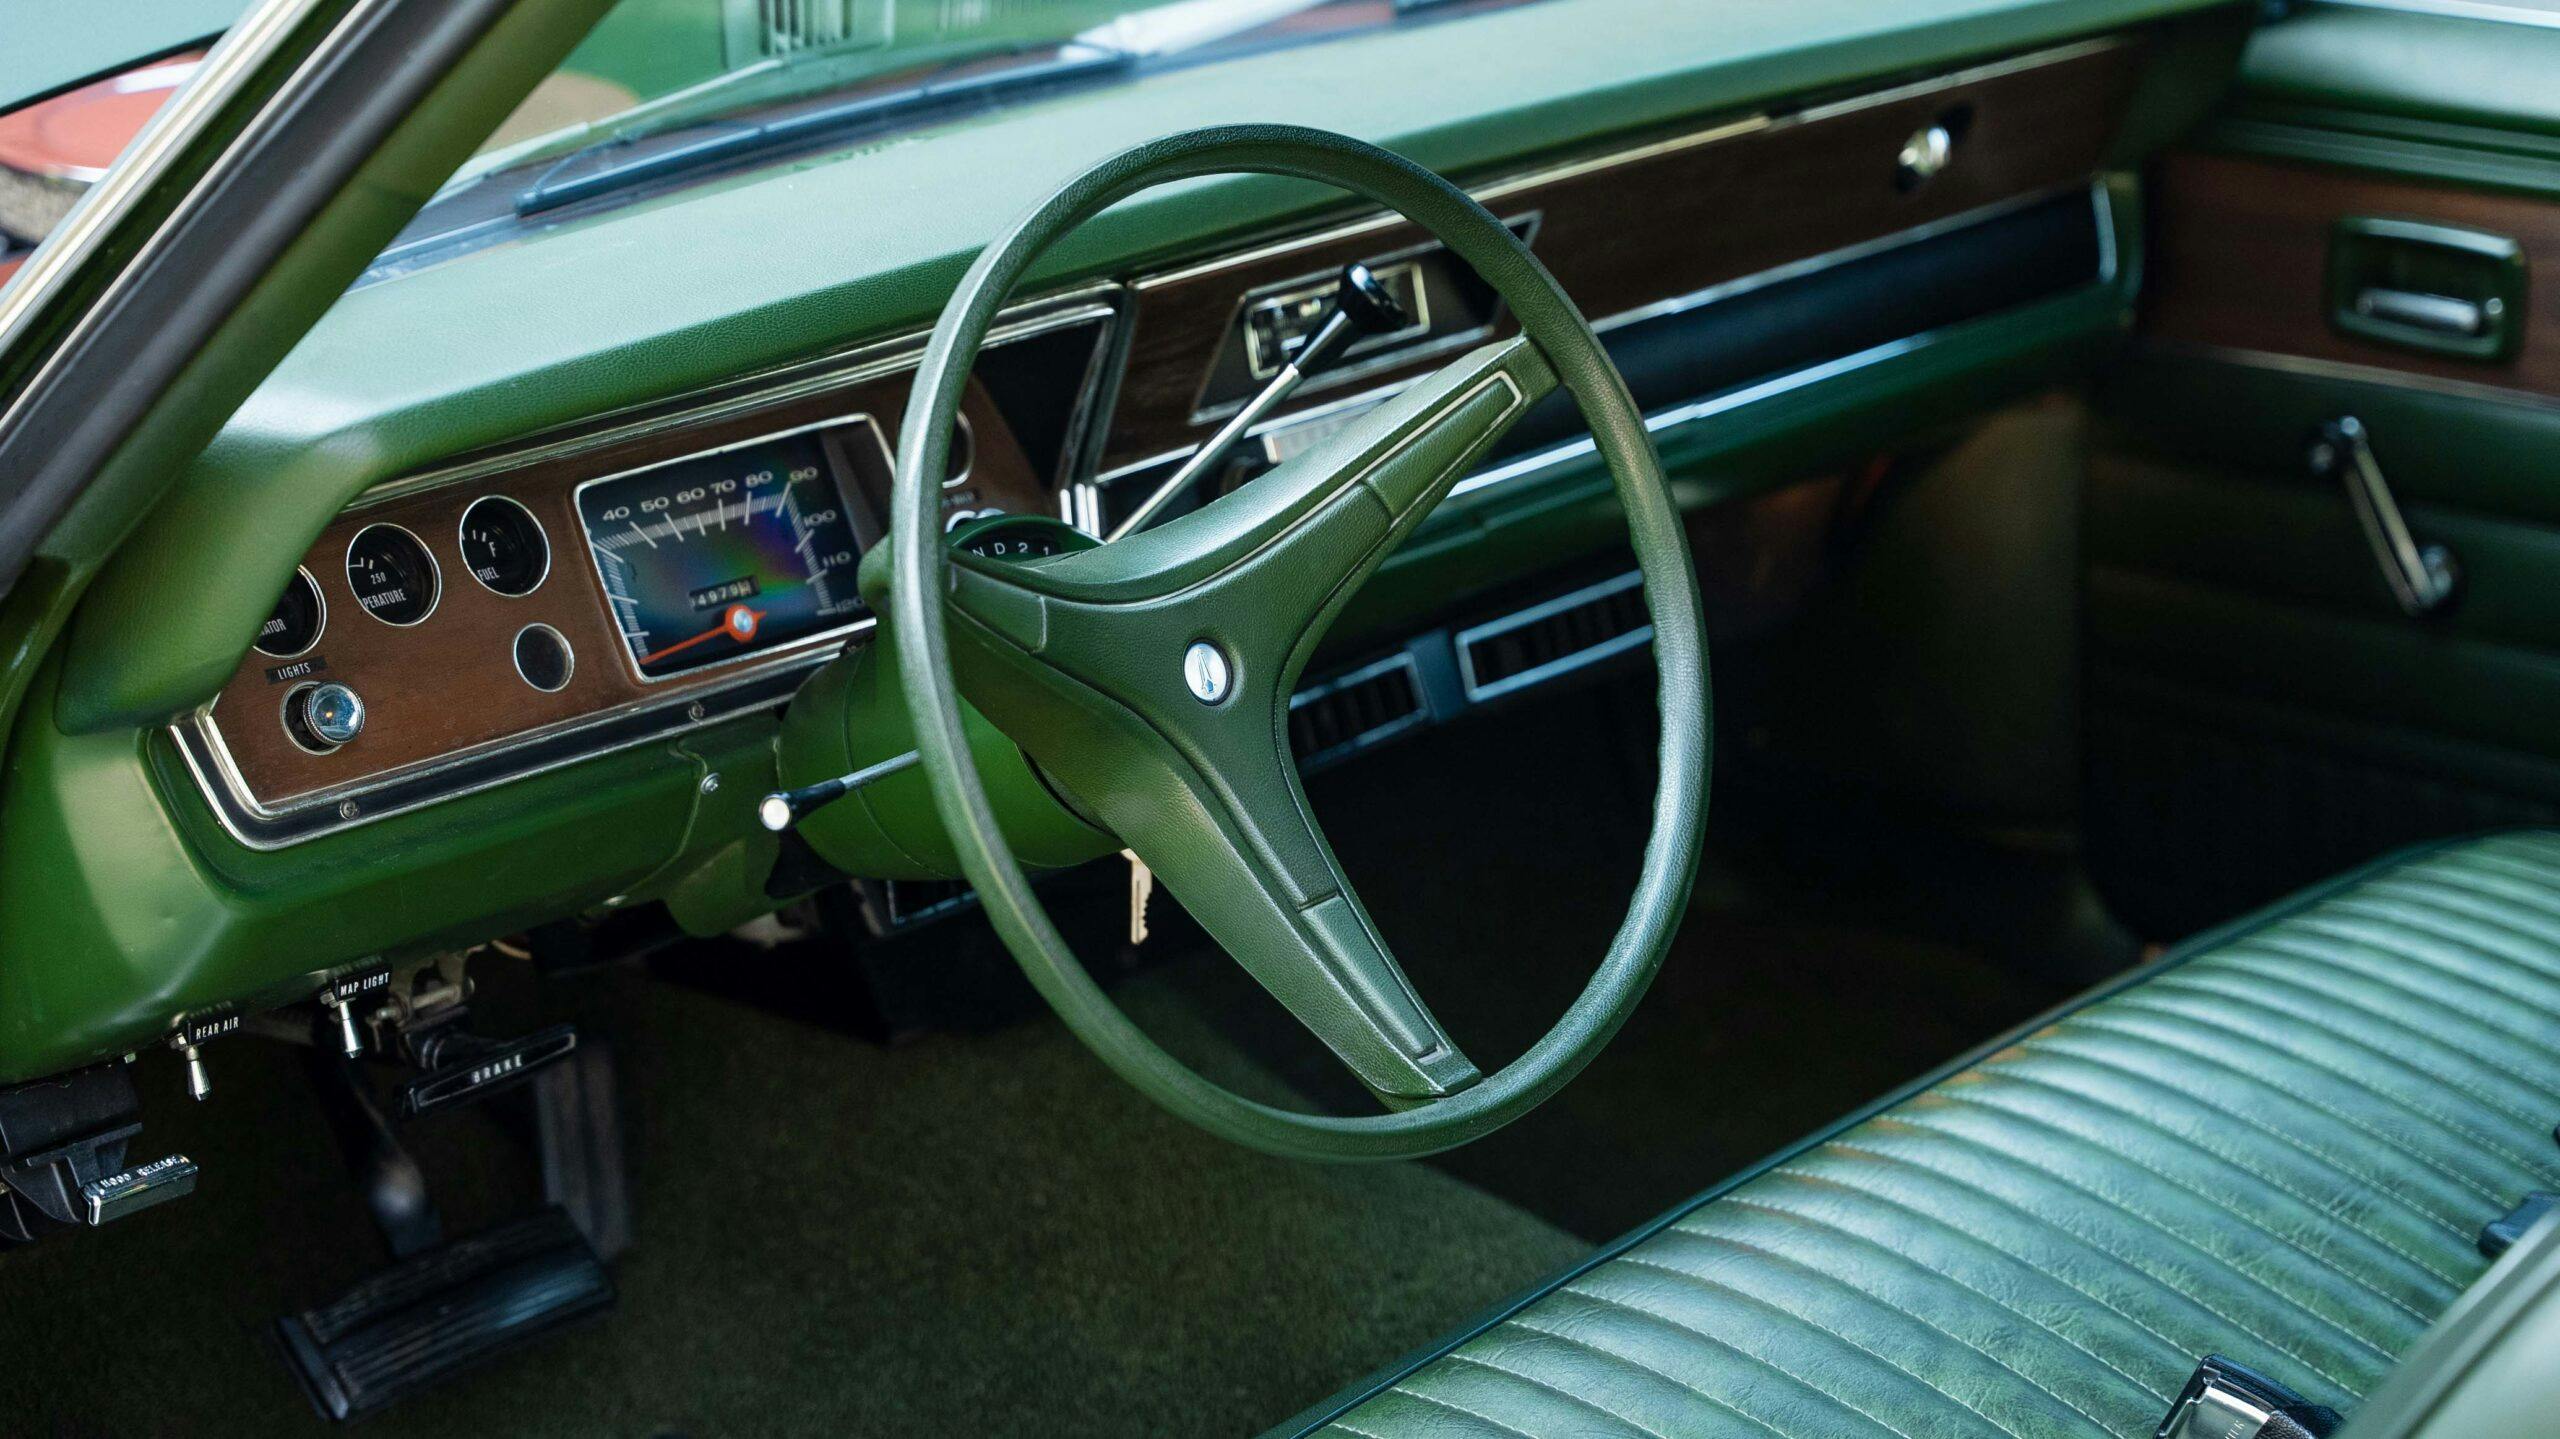 1973 Plymouth Scamp interior front dash angle